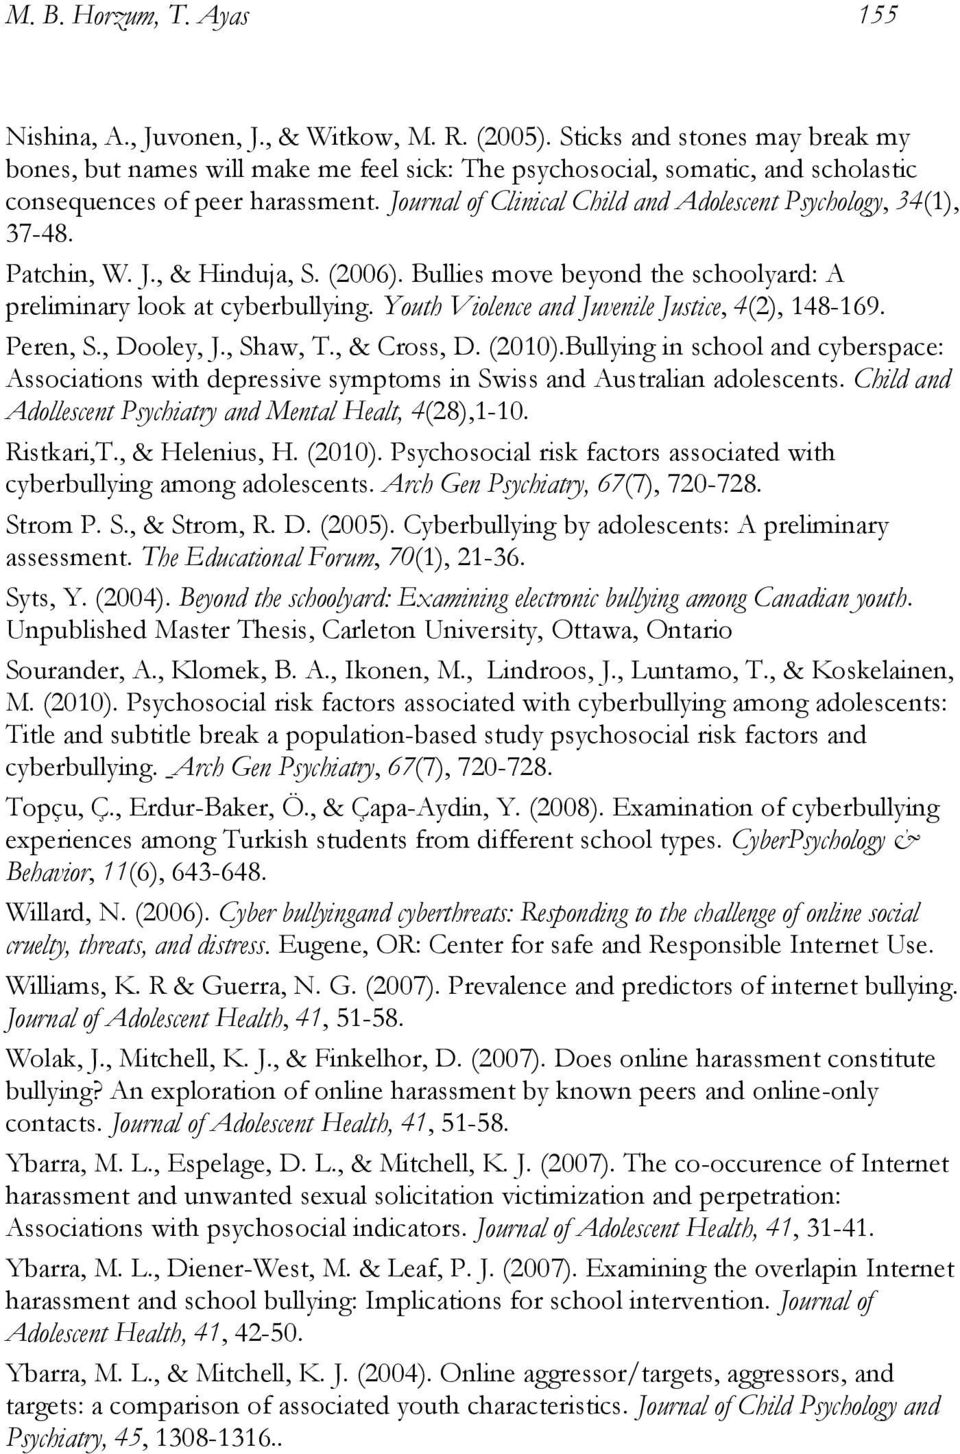 Journal of Clinical Child and Adolescent Psychology, 34(1), 37-48. Patchin, W. J., & Hinduja, S. (2006). Bullies move beyond the schoolyard: A preliminary look at cyberbullying.